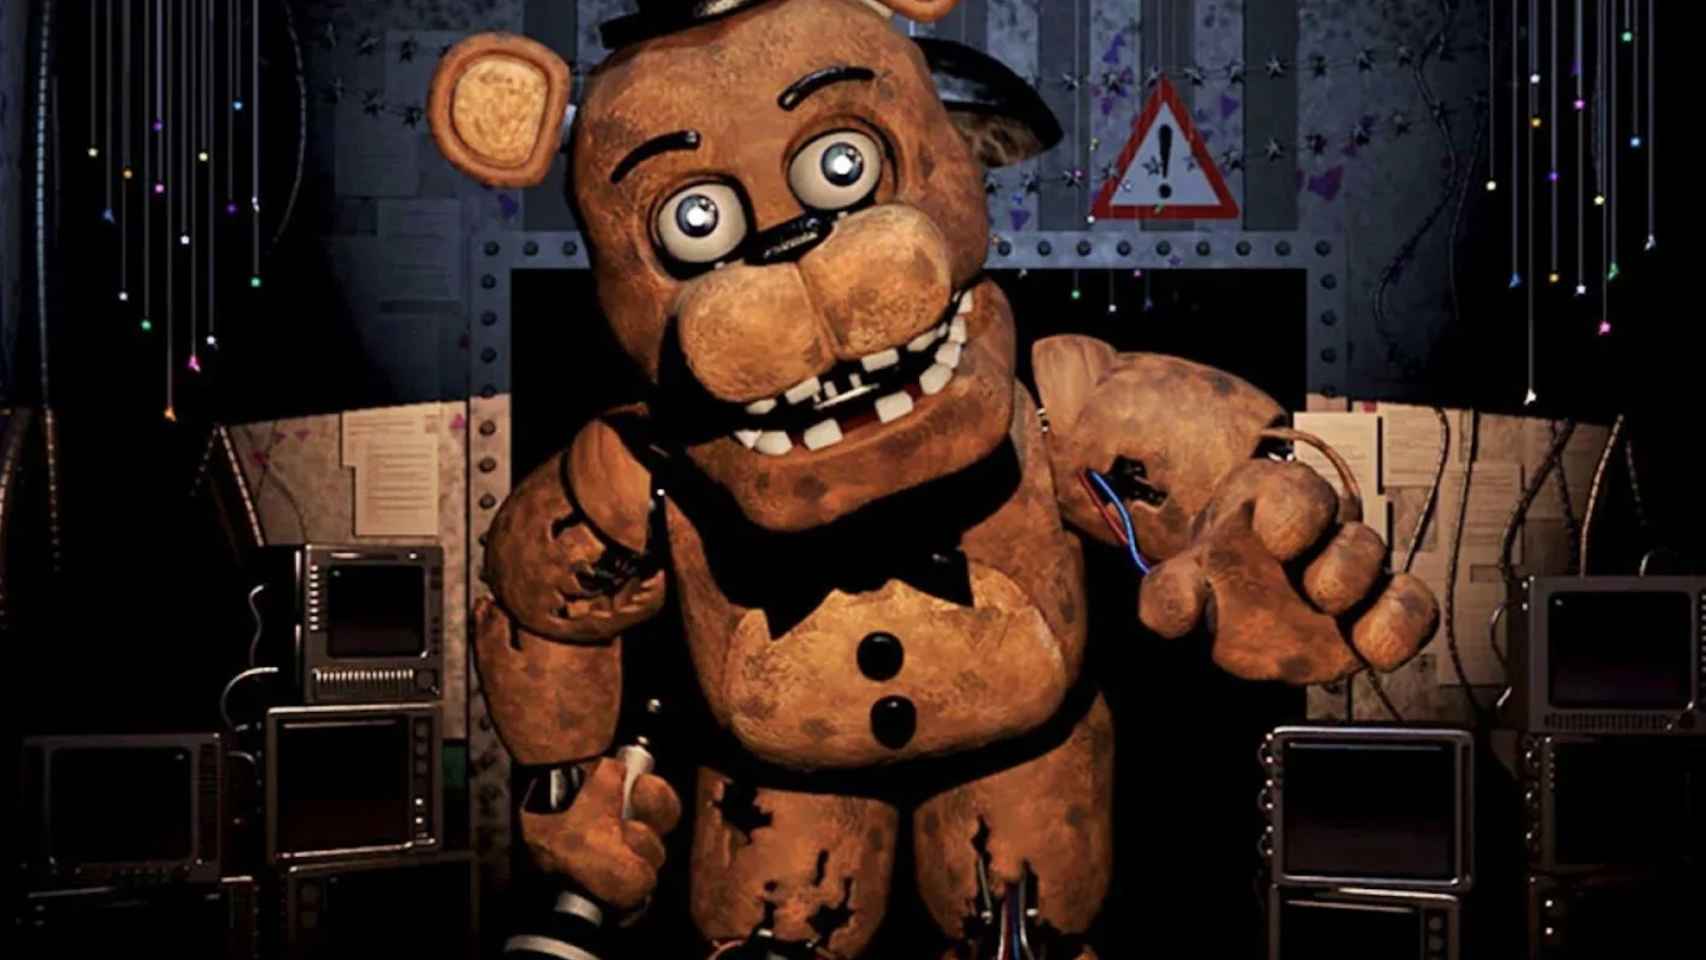 'Five Nights at Freddy's'.